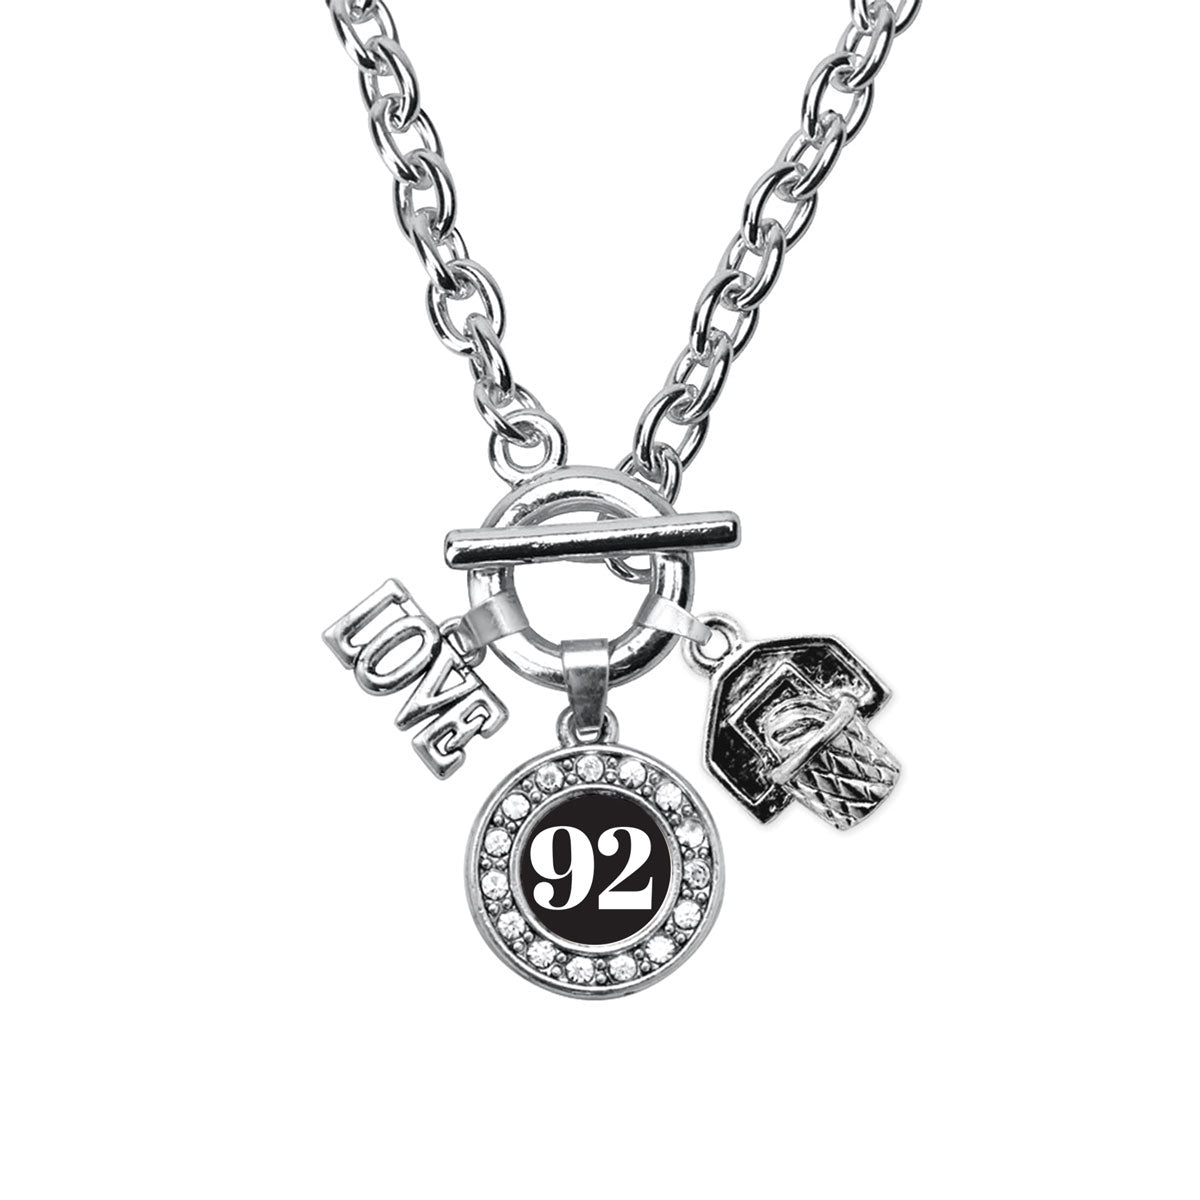 Silver Basketball Hoop - Sports Number 92 Circle Charm Toggle Necklace